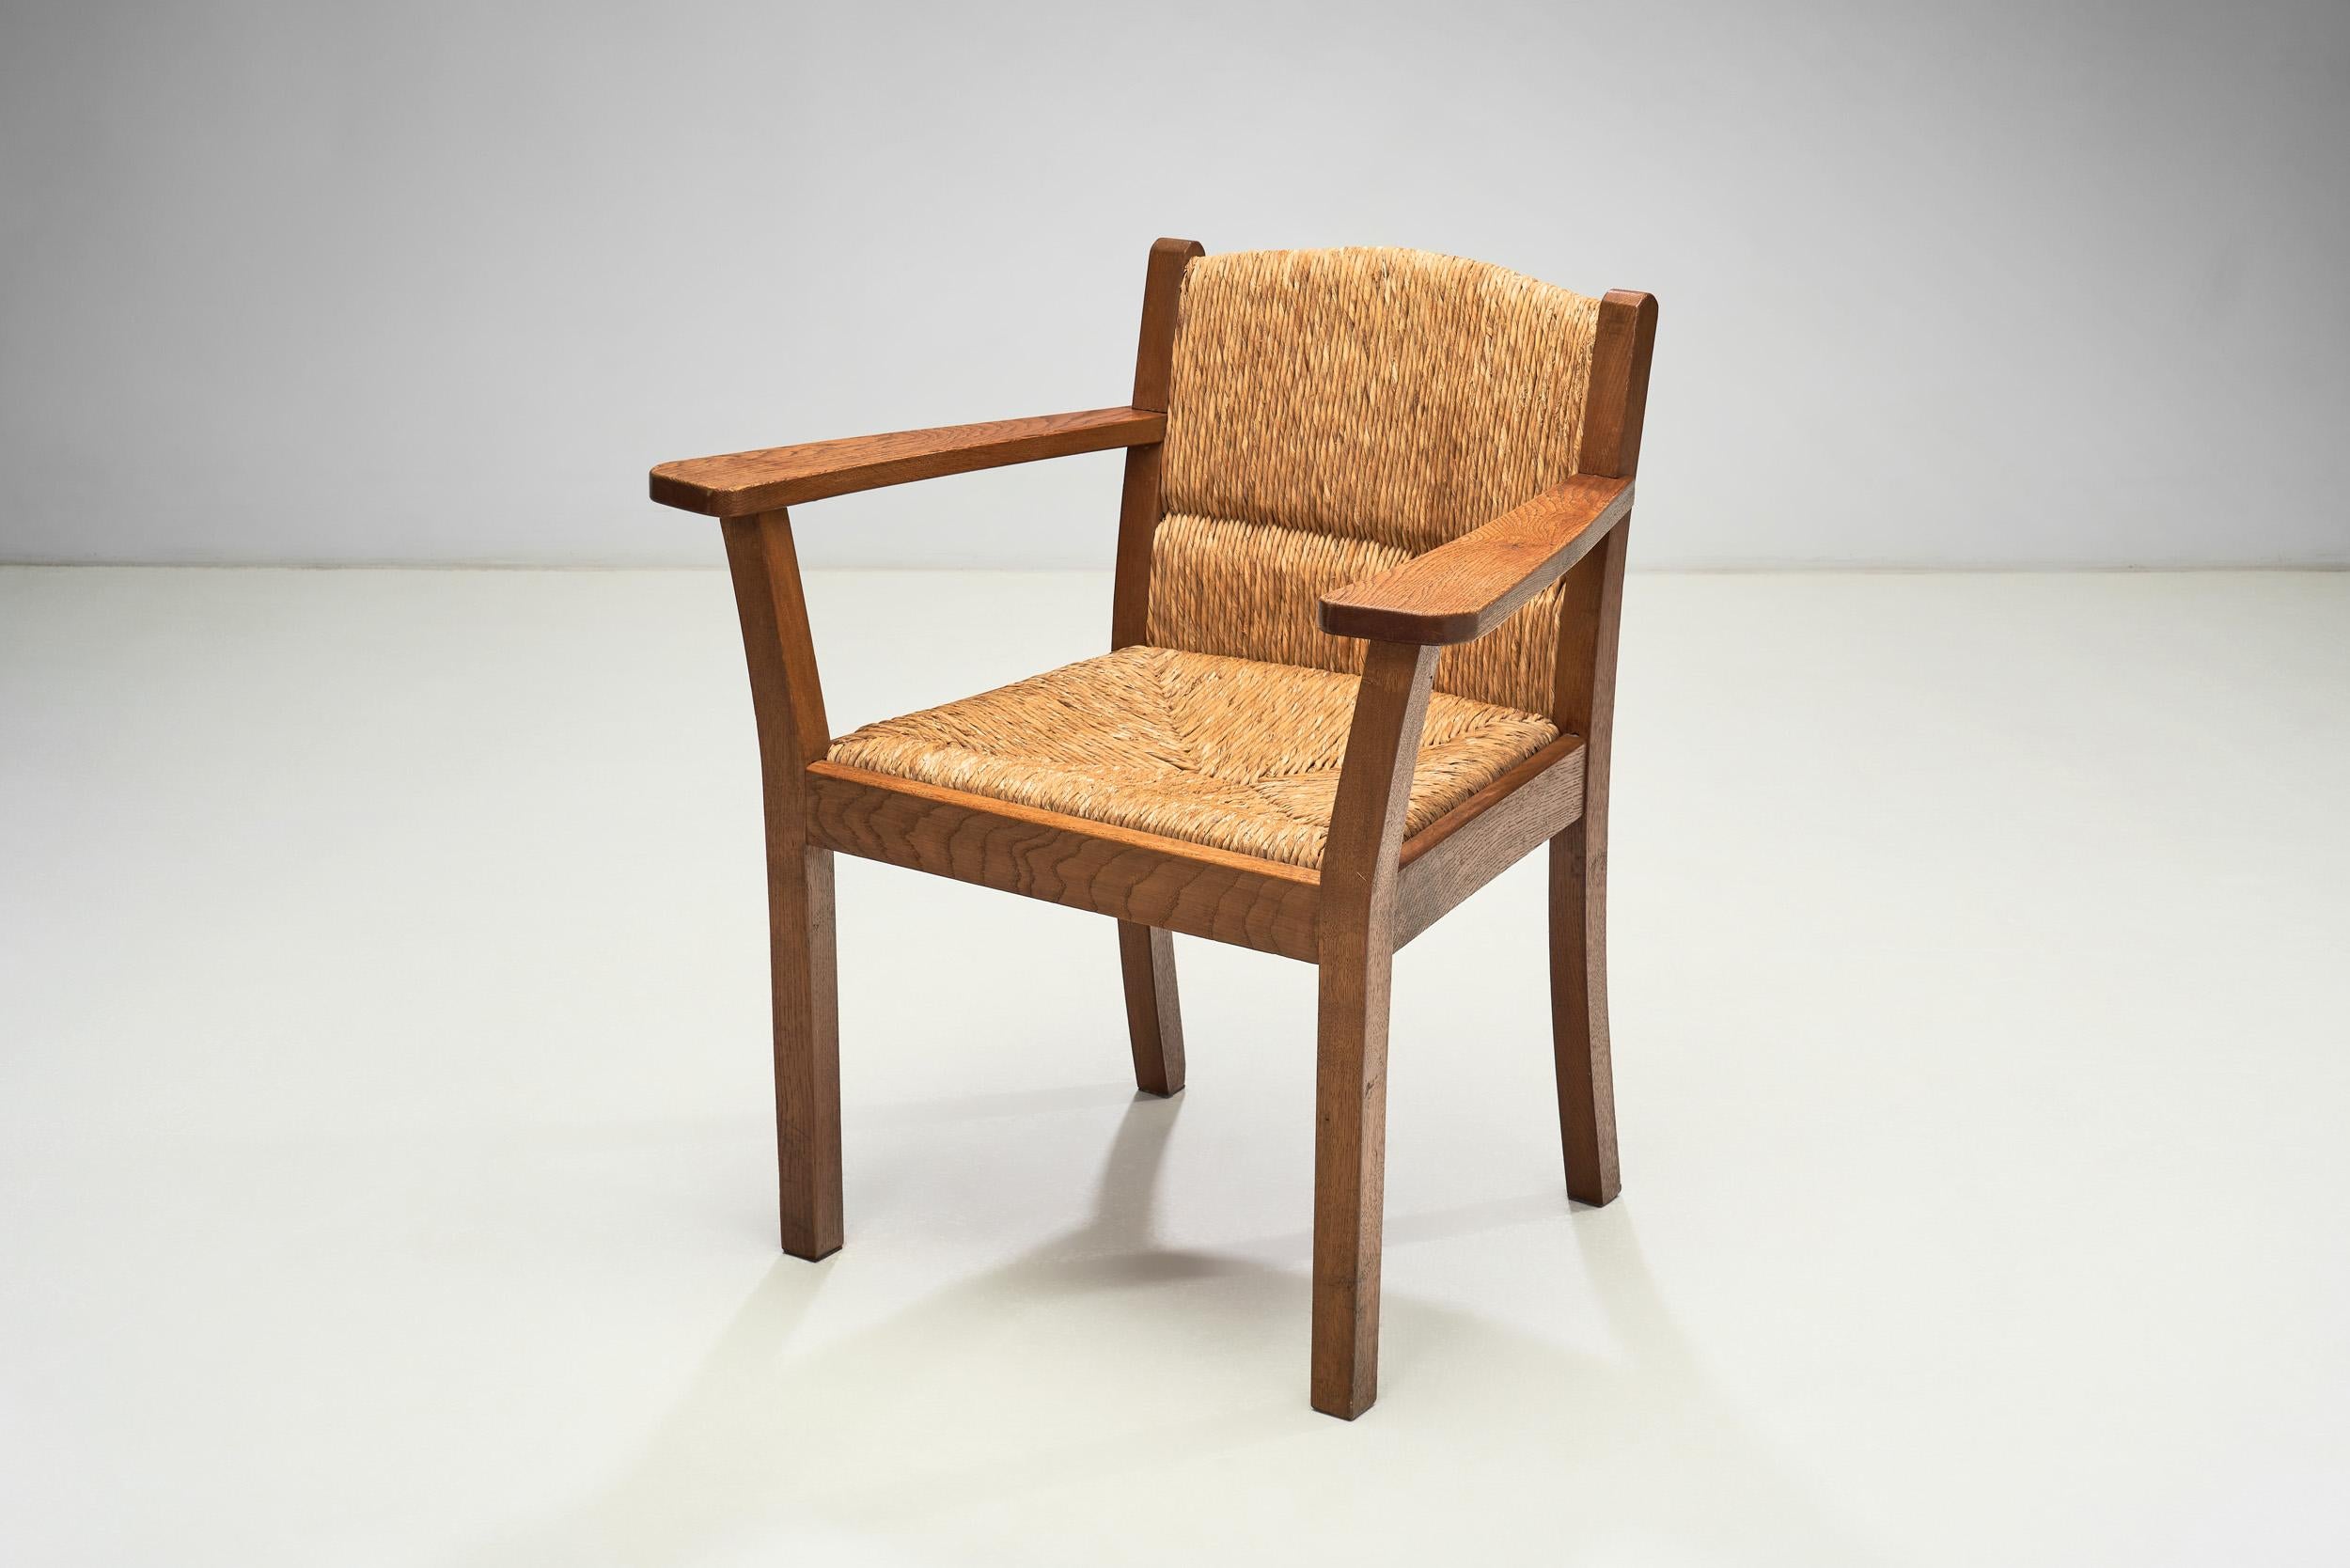 Oak Worpsweder Armchair by Willi Ohler for Erich Schultz, Germany 1920s For Sale 4